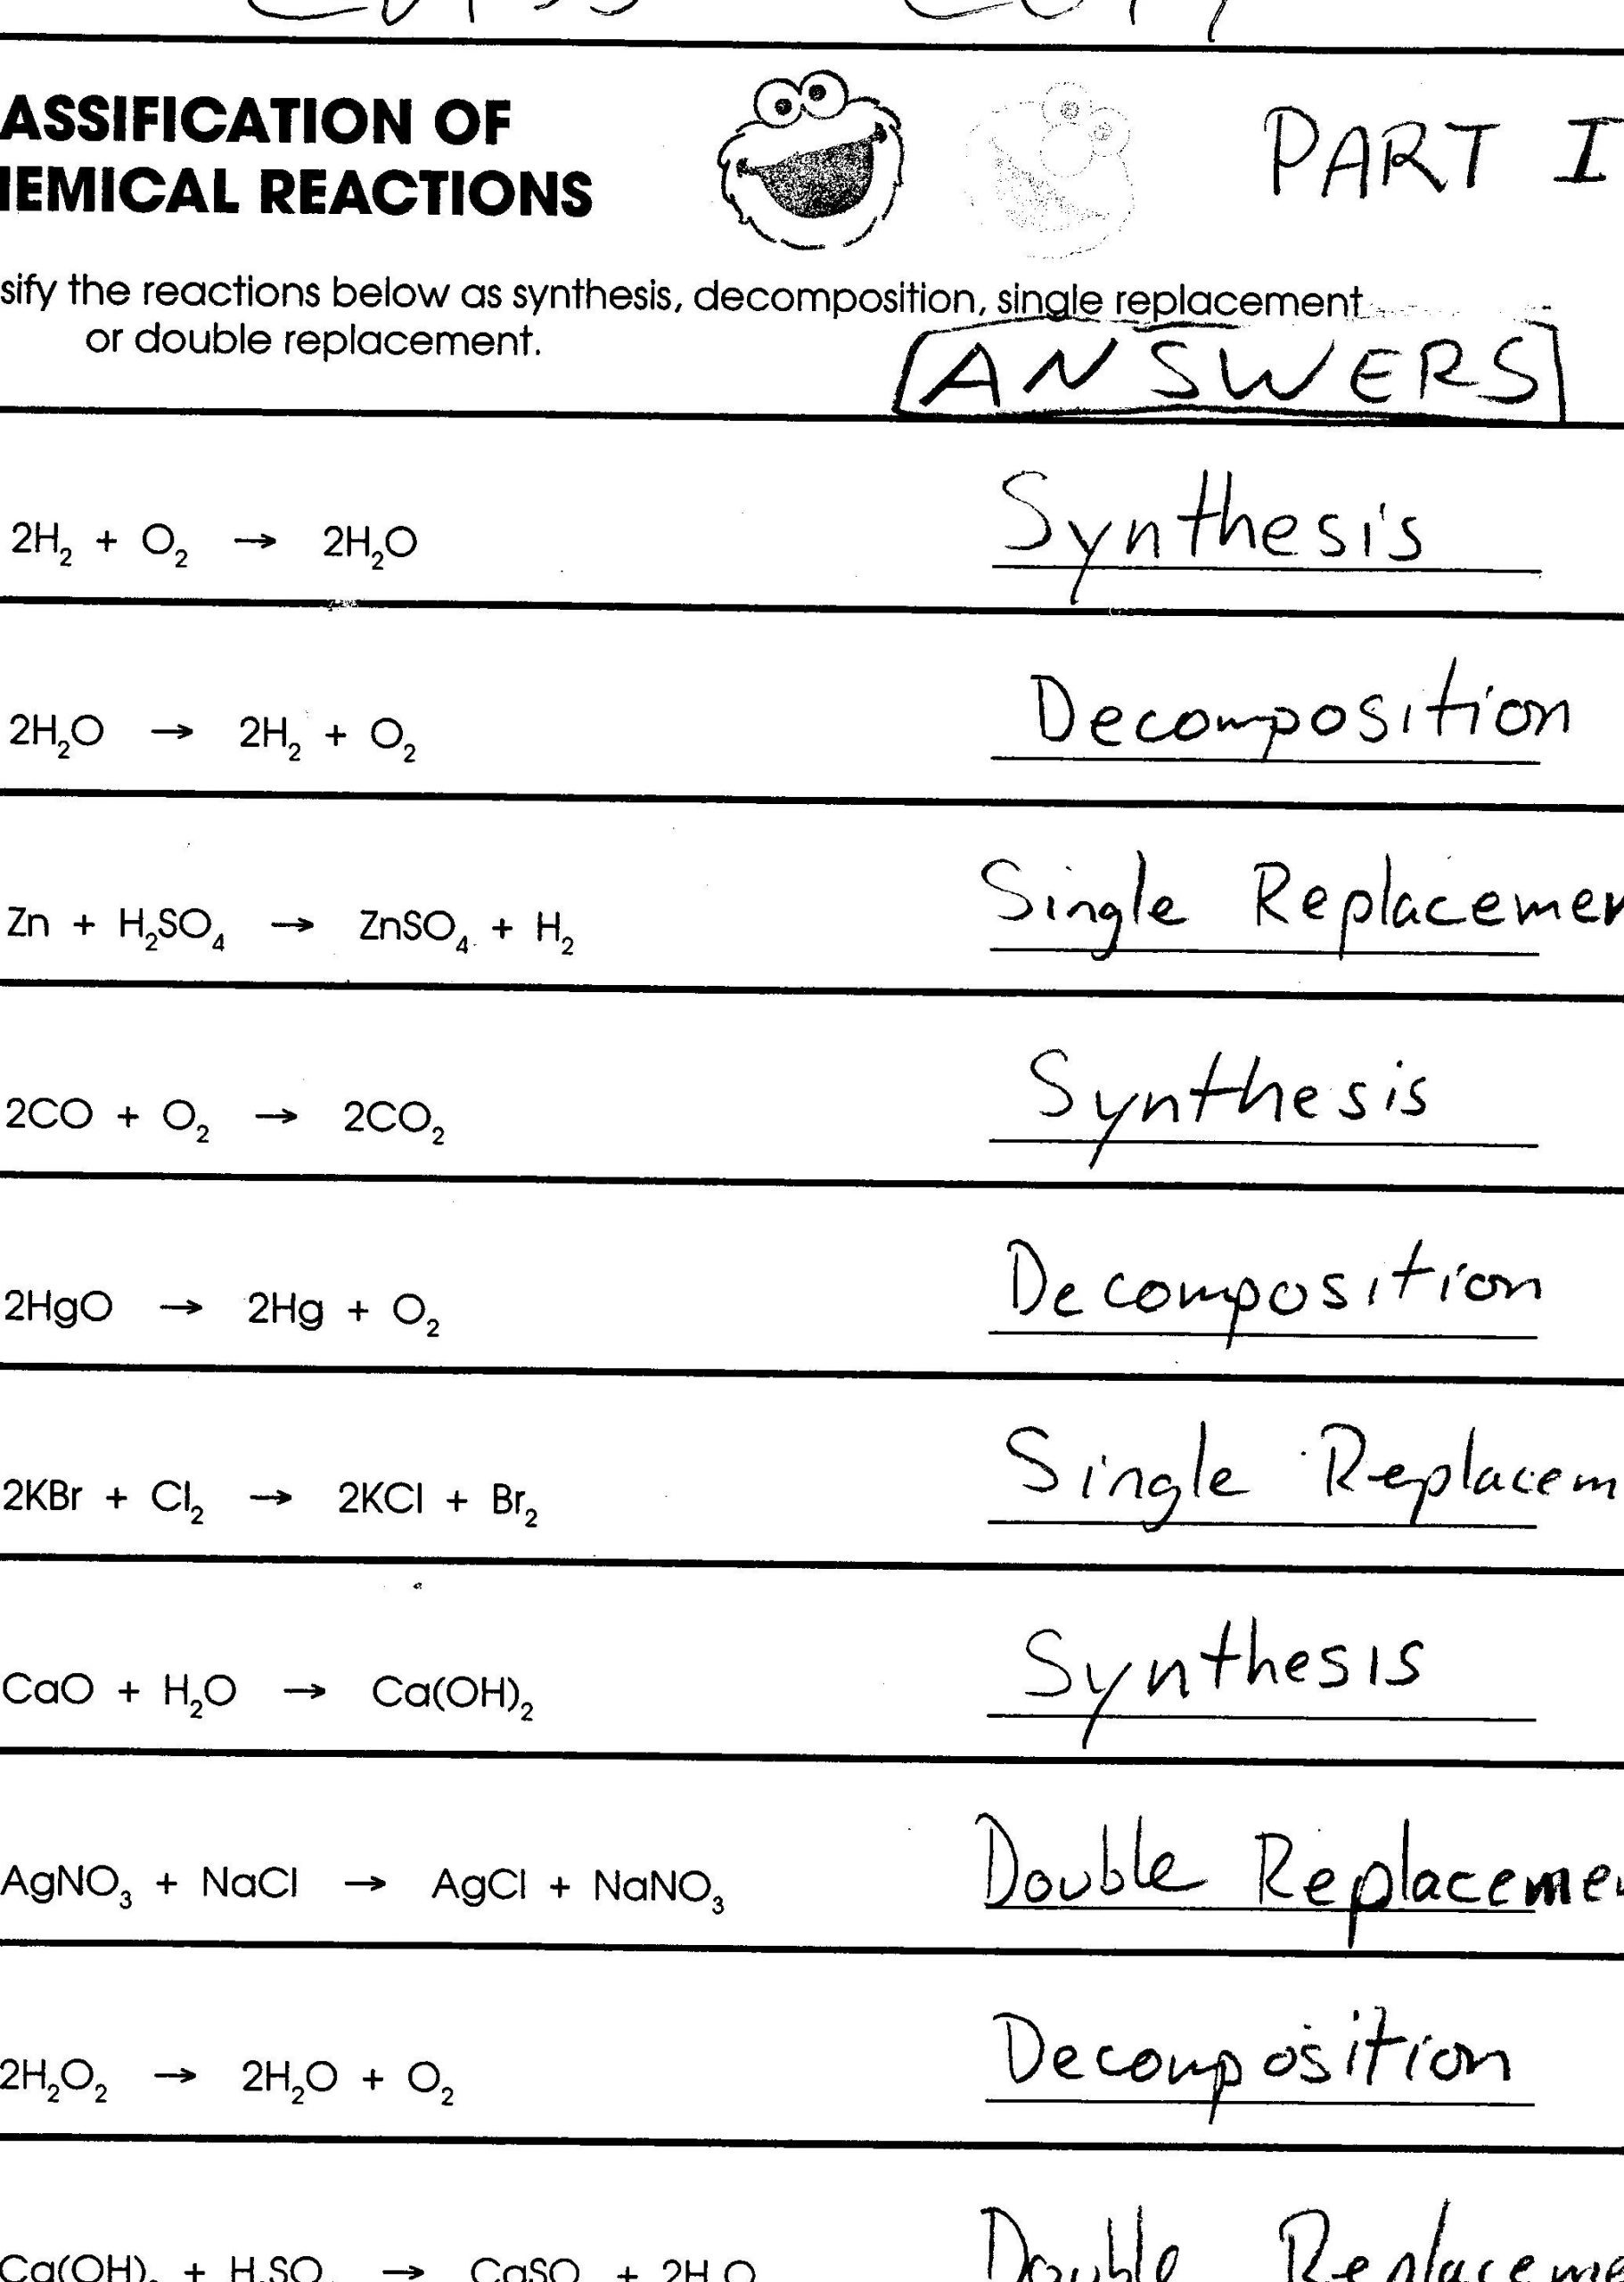 Classifying Matter Worksheet Answer Key 10 Classifying Chemical Reactions Worksheet Answers